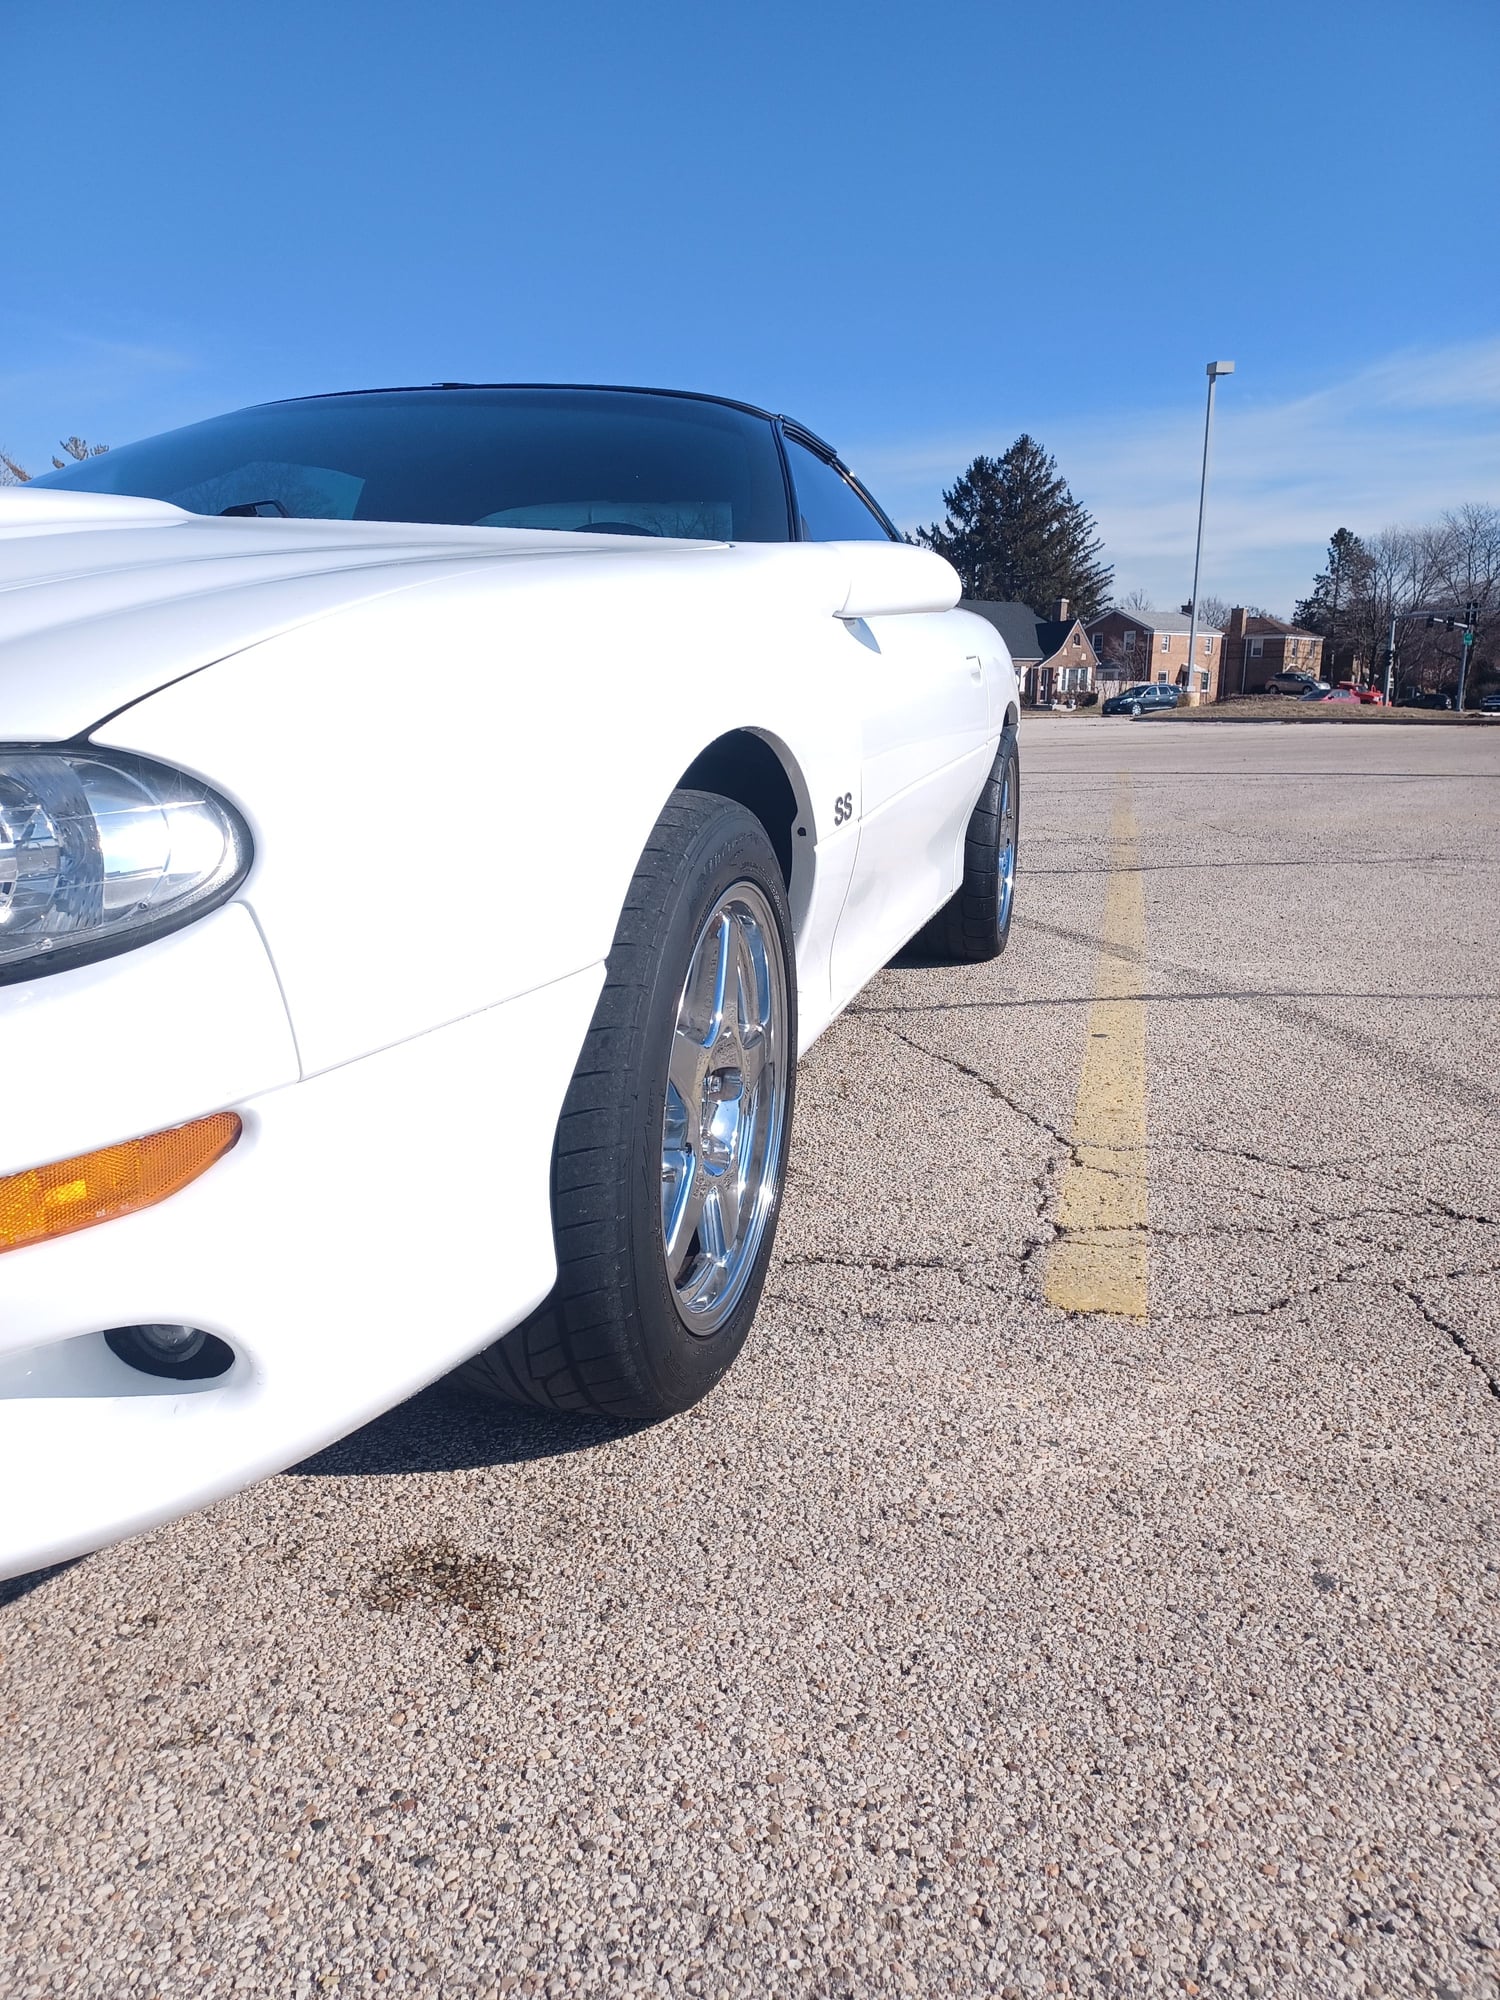 2000 Chevrolet Camaro - 2000 Camaro SS! BUILT! Fast, reliable, daily driveable! Heat and AC! Big Motor! - Used - Chicago, IL 60018, United States